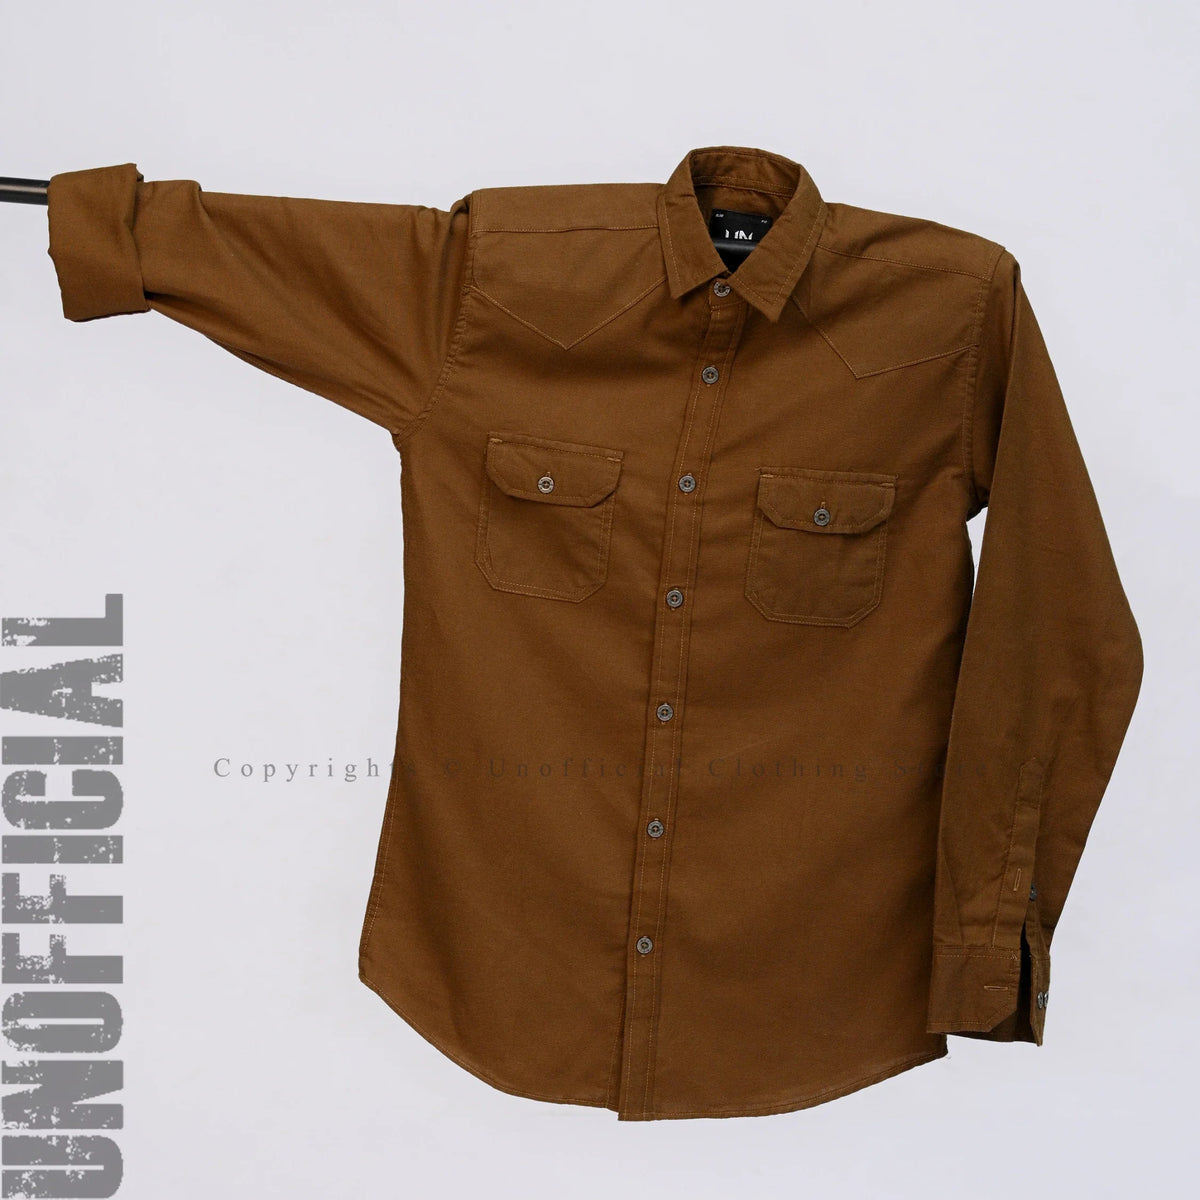 BROWN-DOUBLE POCKET SHIRT